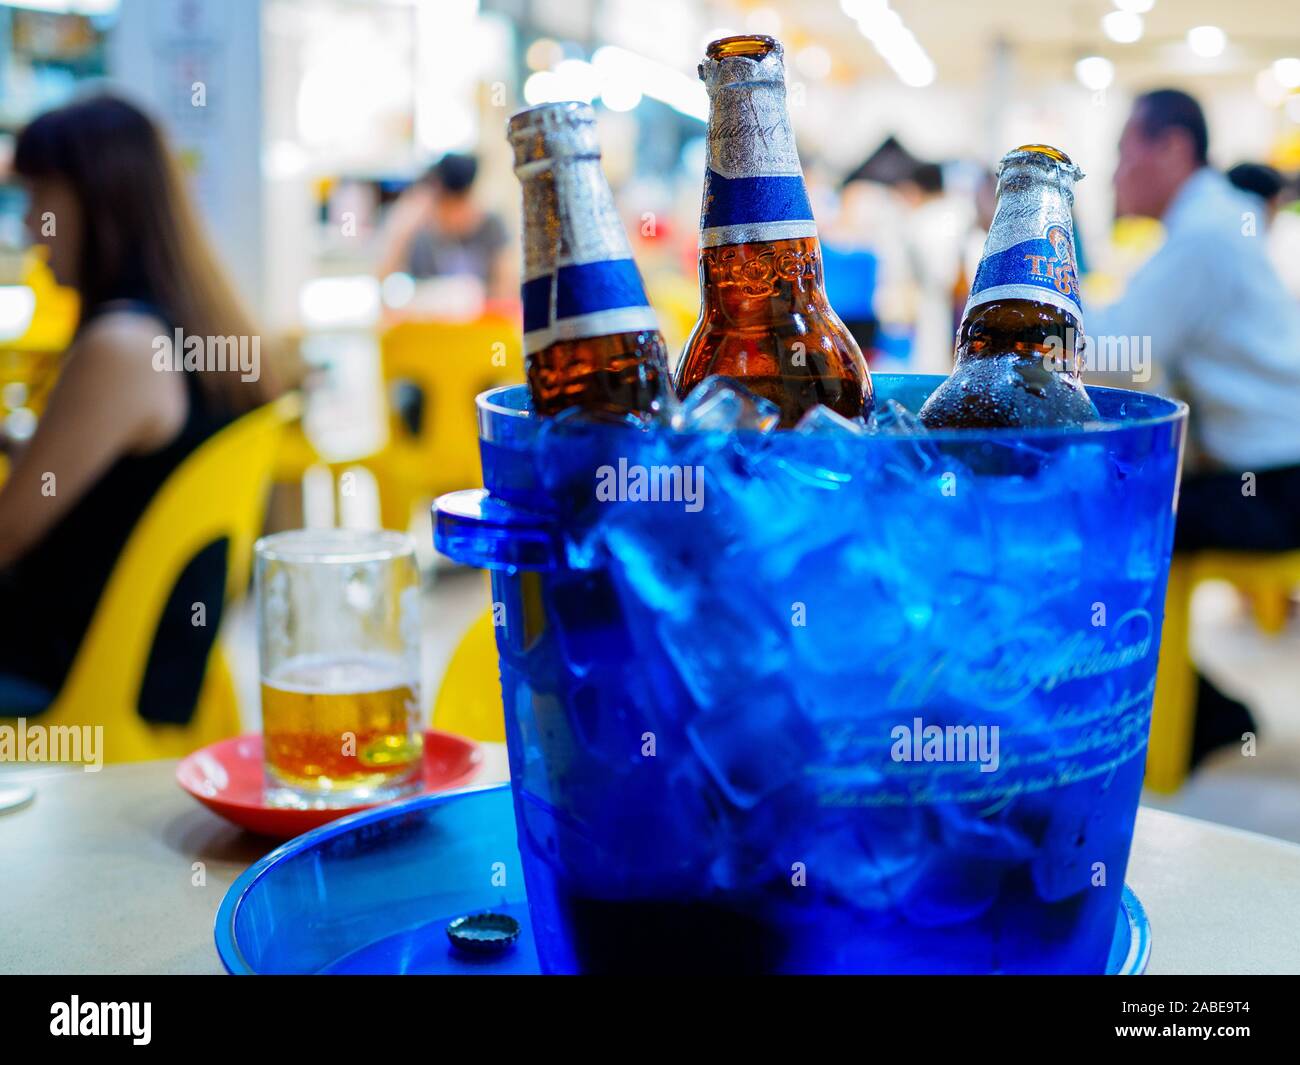 SINGAPORE - 17 MAR 2019 - Bottles of Tiger beer sit in a bucket of ice at a coffeeshop / kopitiam / hawker centre. Drinking beer at a coffeshop is com Stock Photo